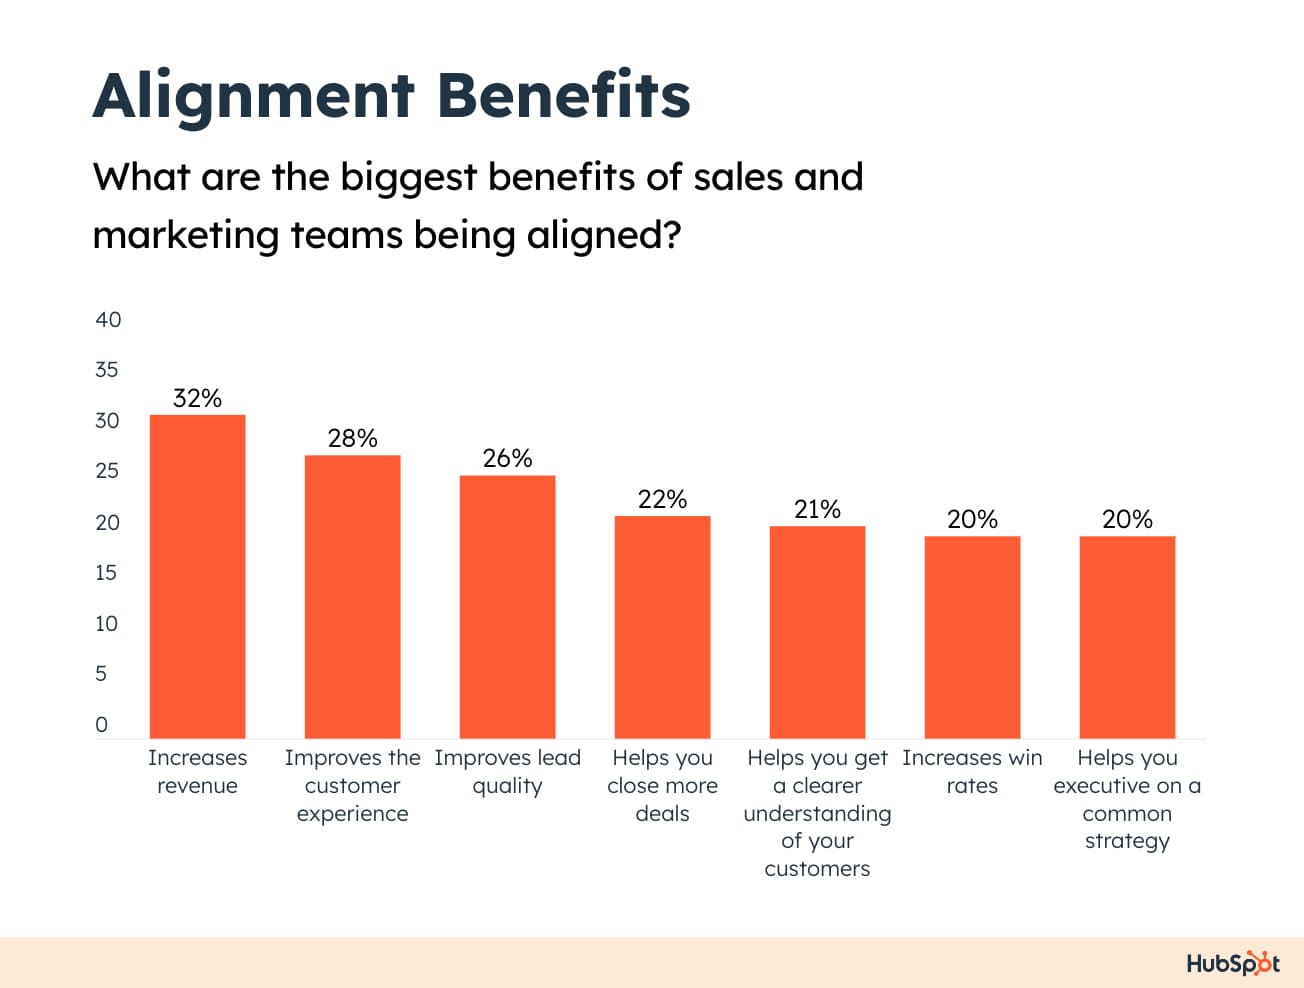 what are the biggest benefits of sales and marketing teams being aligned?